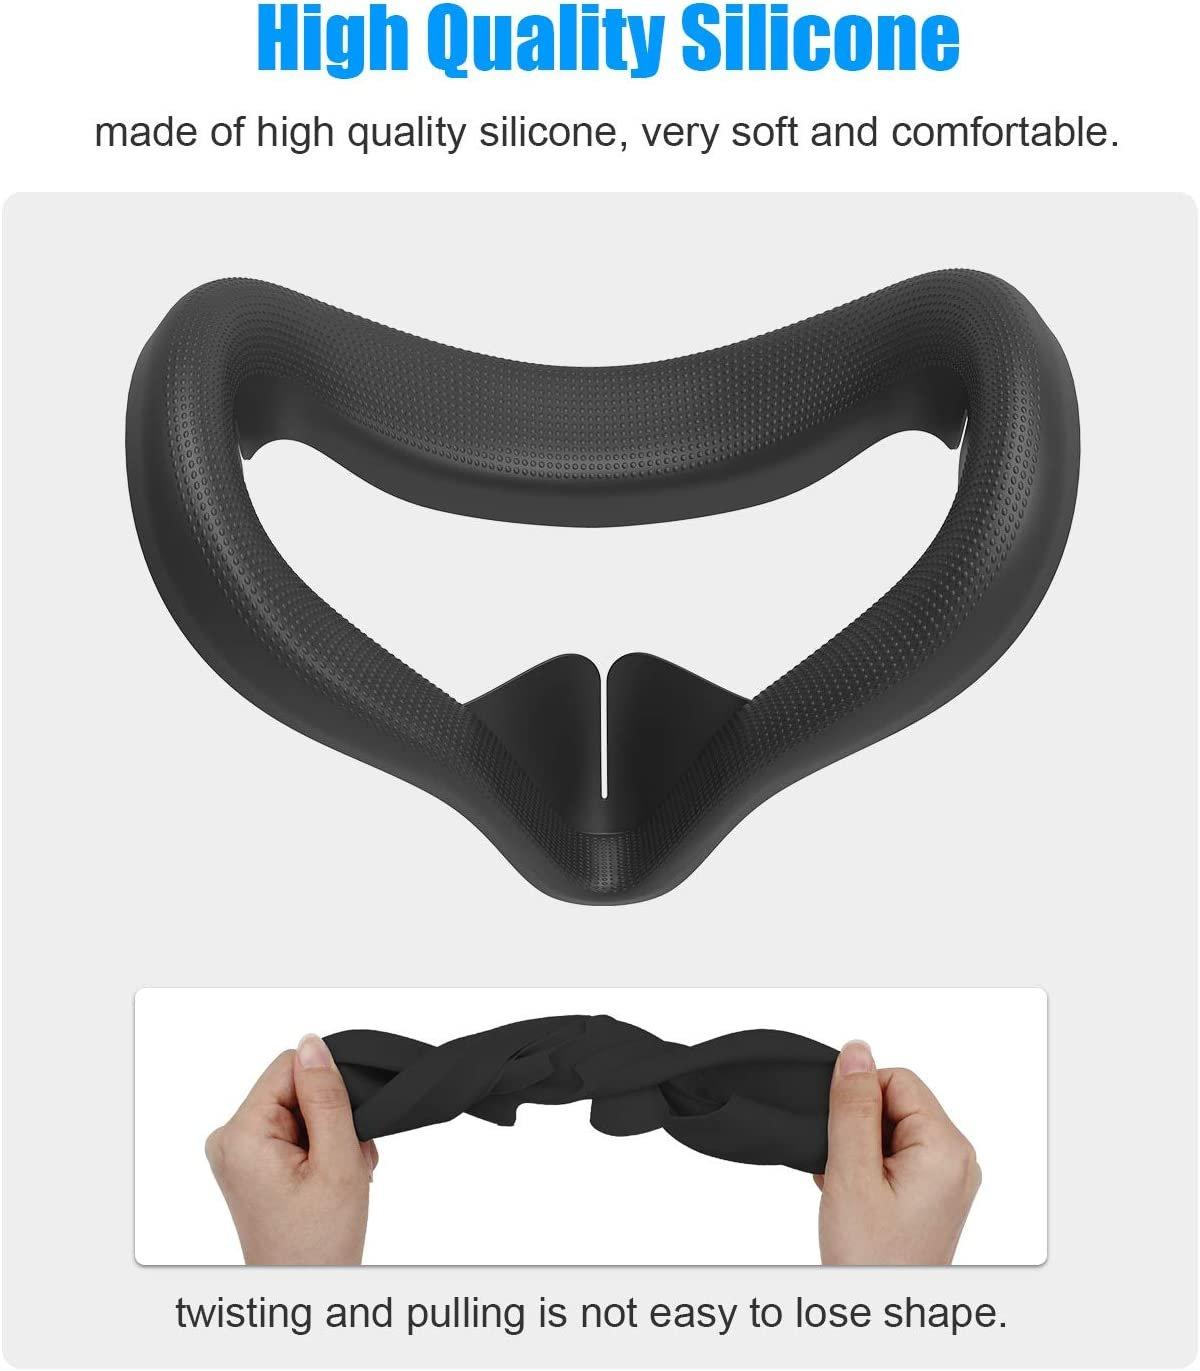 AMVR Silicone Face Cover for Meta Quest 2 - Black